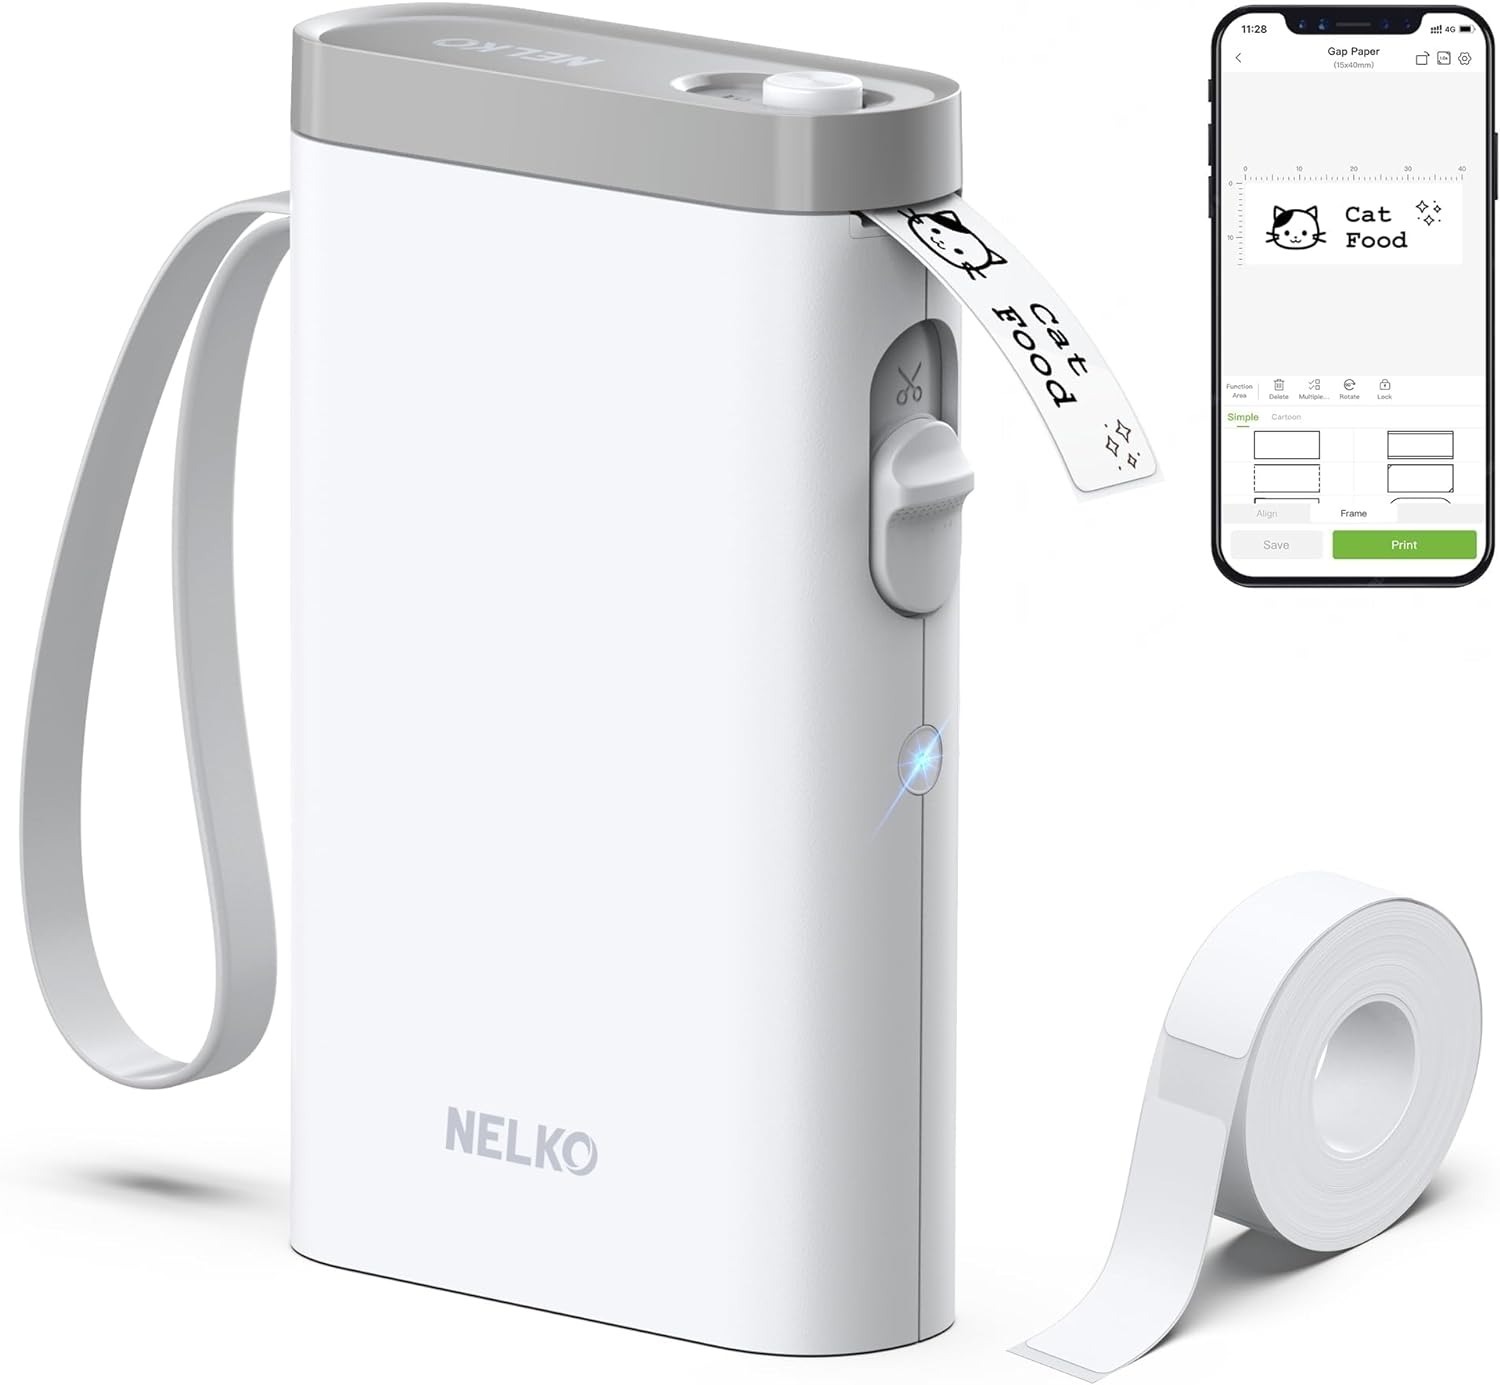 Nelko P21 Bluetooth Mini Thermal Label Maker w/ Tape (Various Colors) $12.42 + Free Shipping w/ Prime or $35+ orders